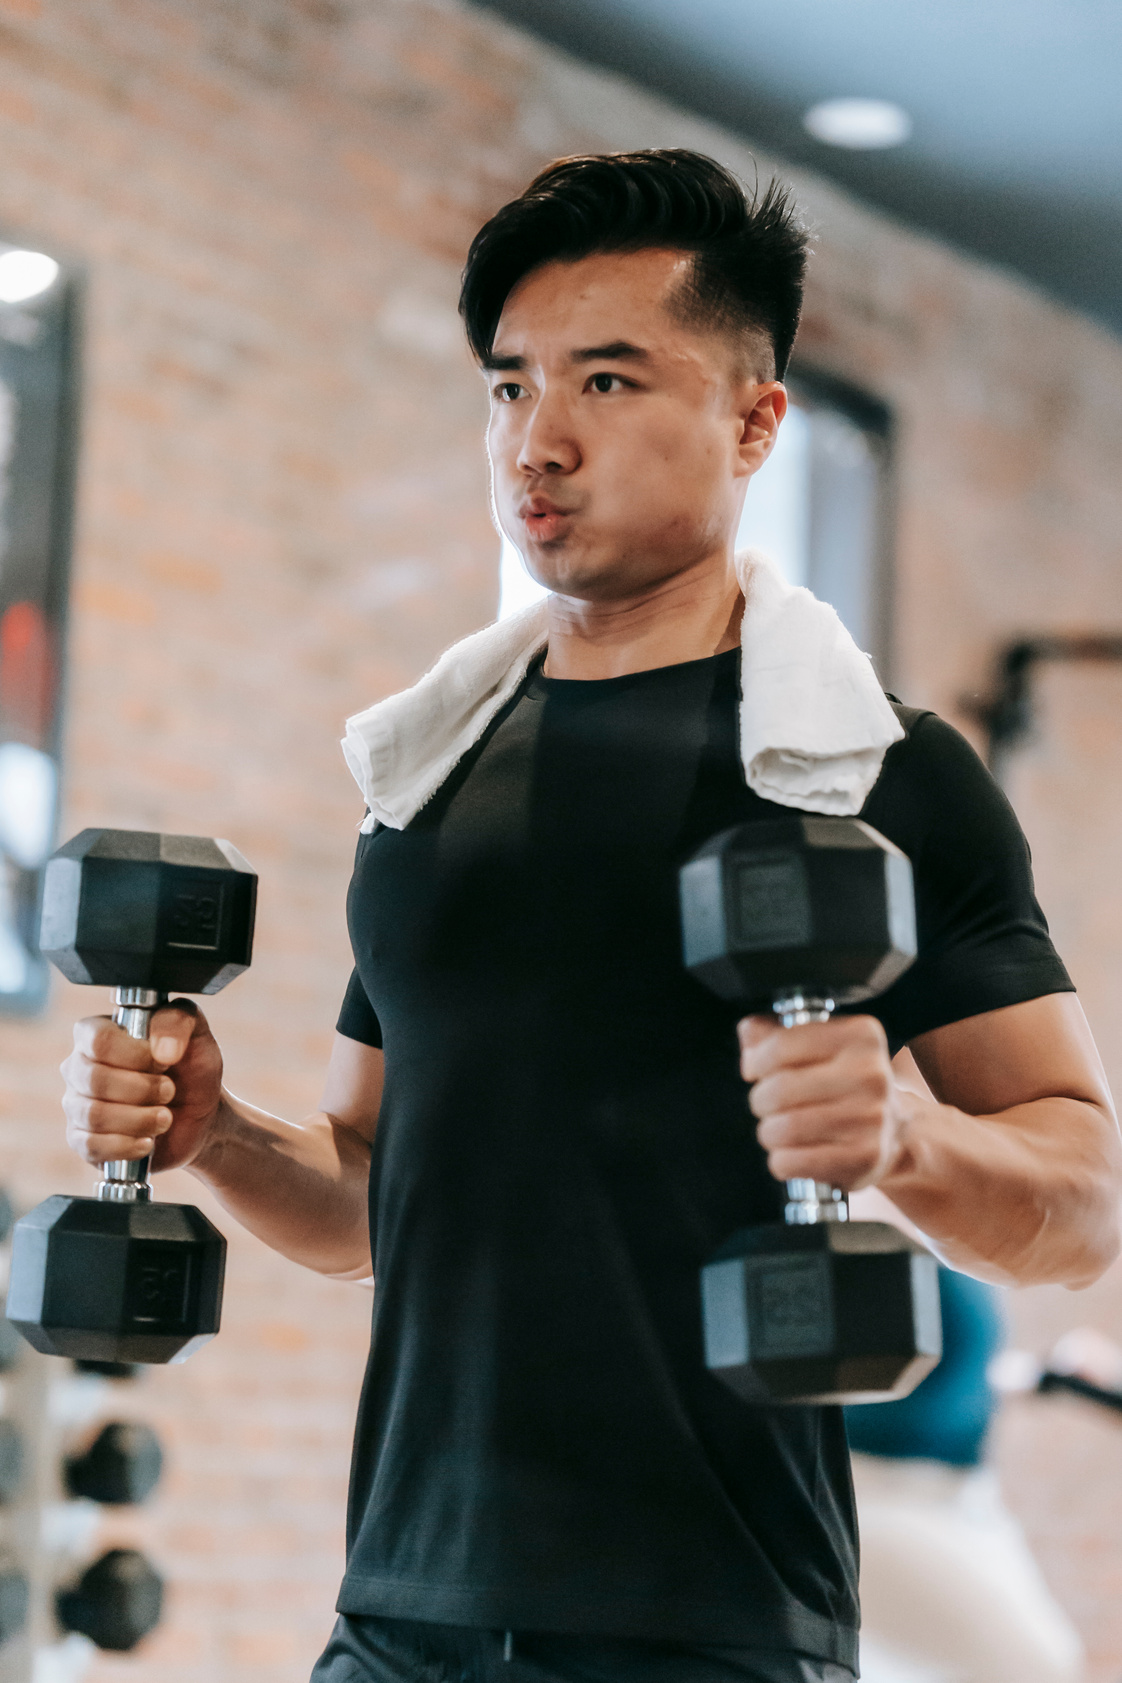 Muscular Asian man working out heavy weights